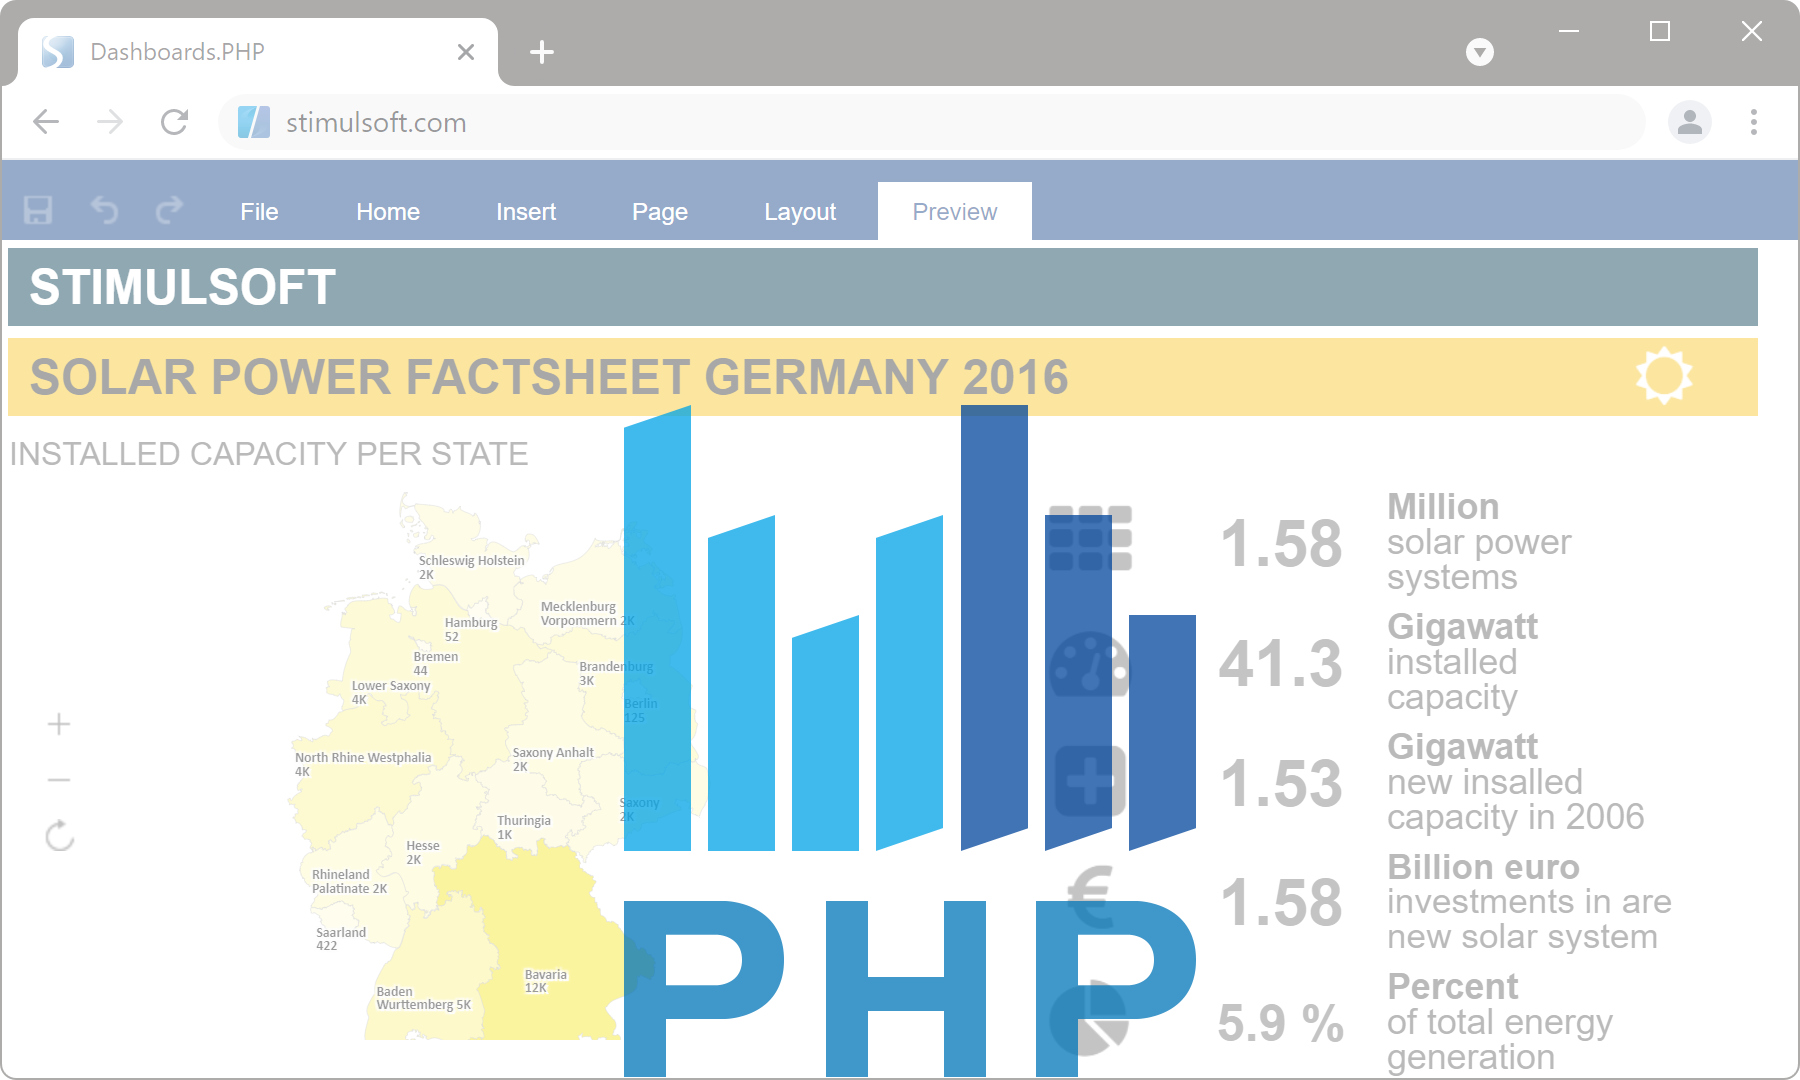 Dashboards.PHP